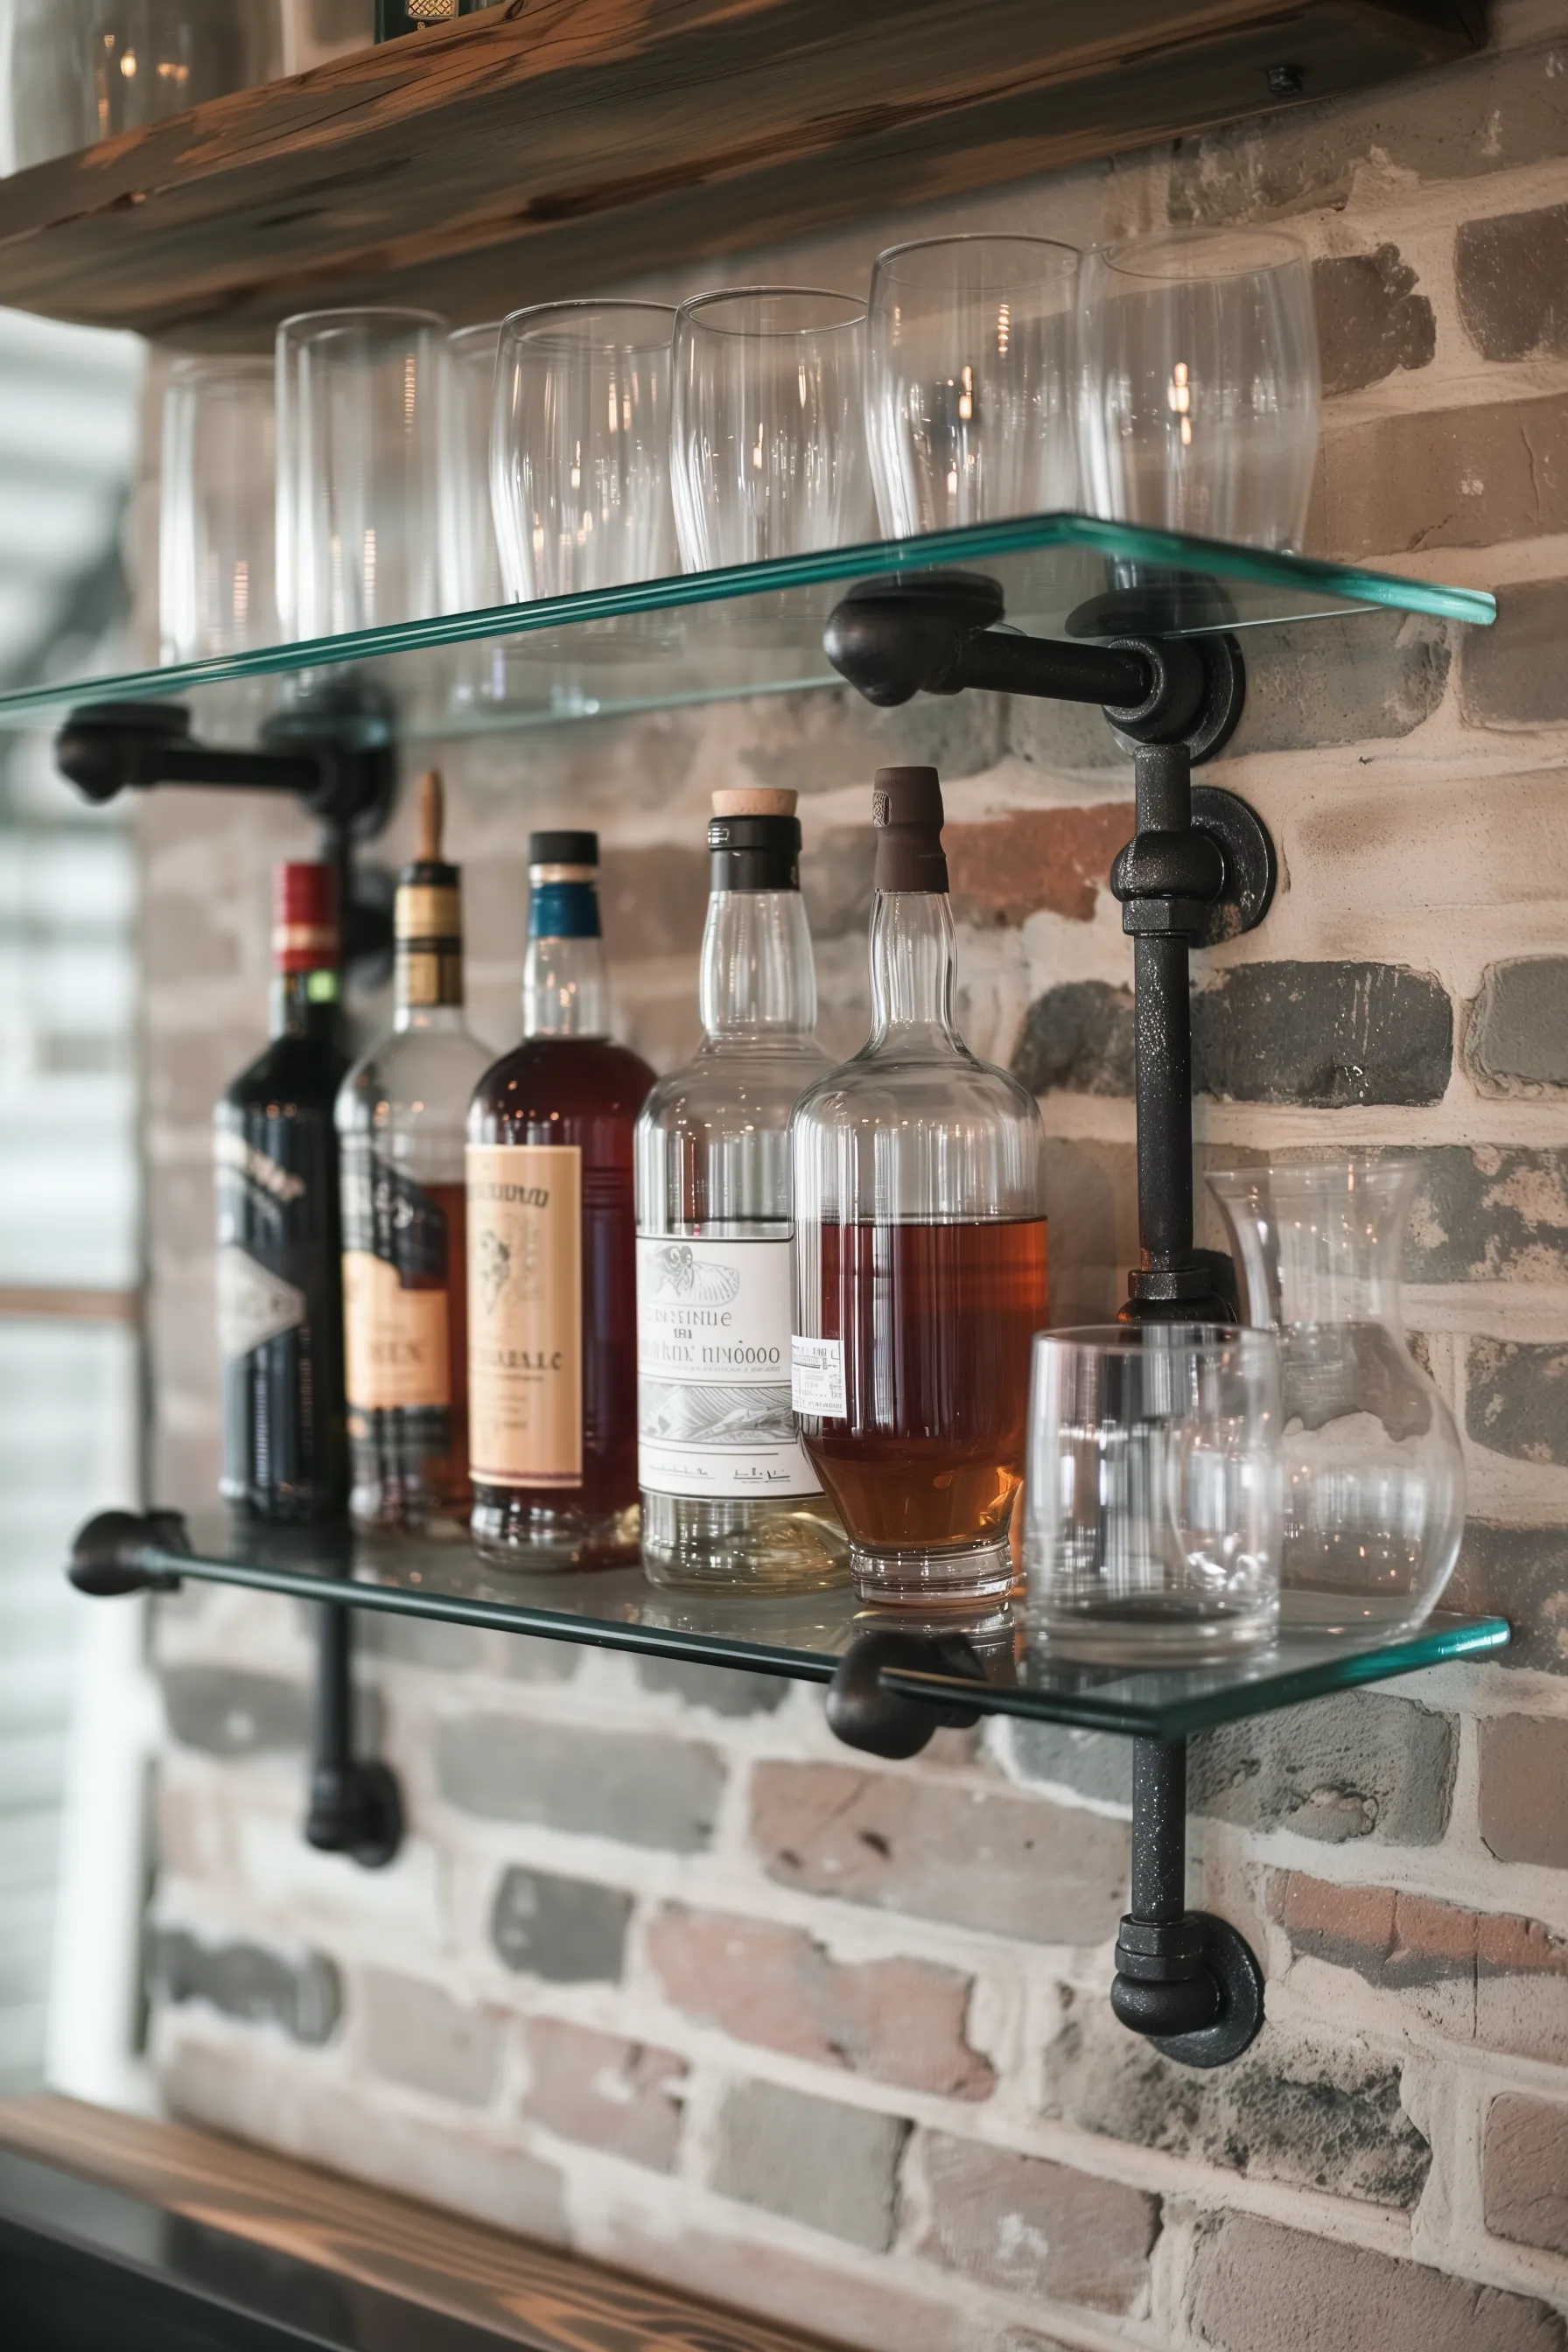 A metal and glass bar shelving unit